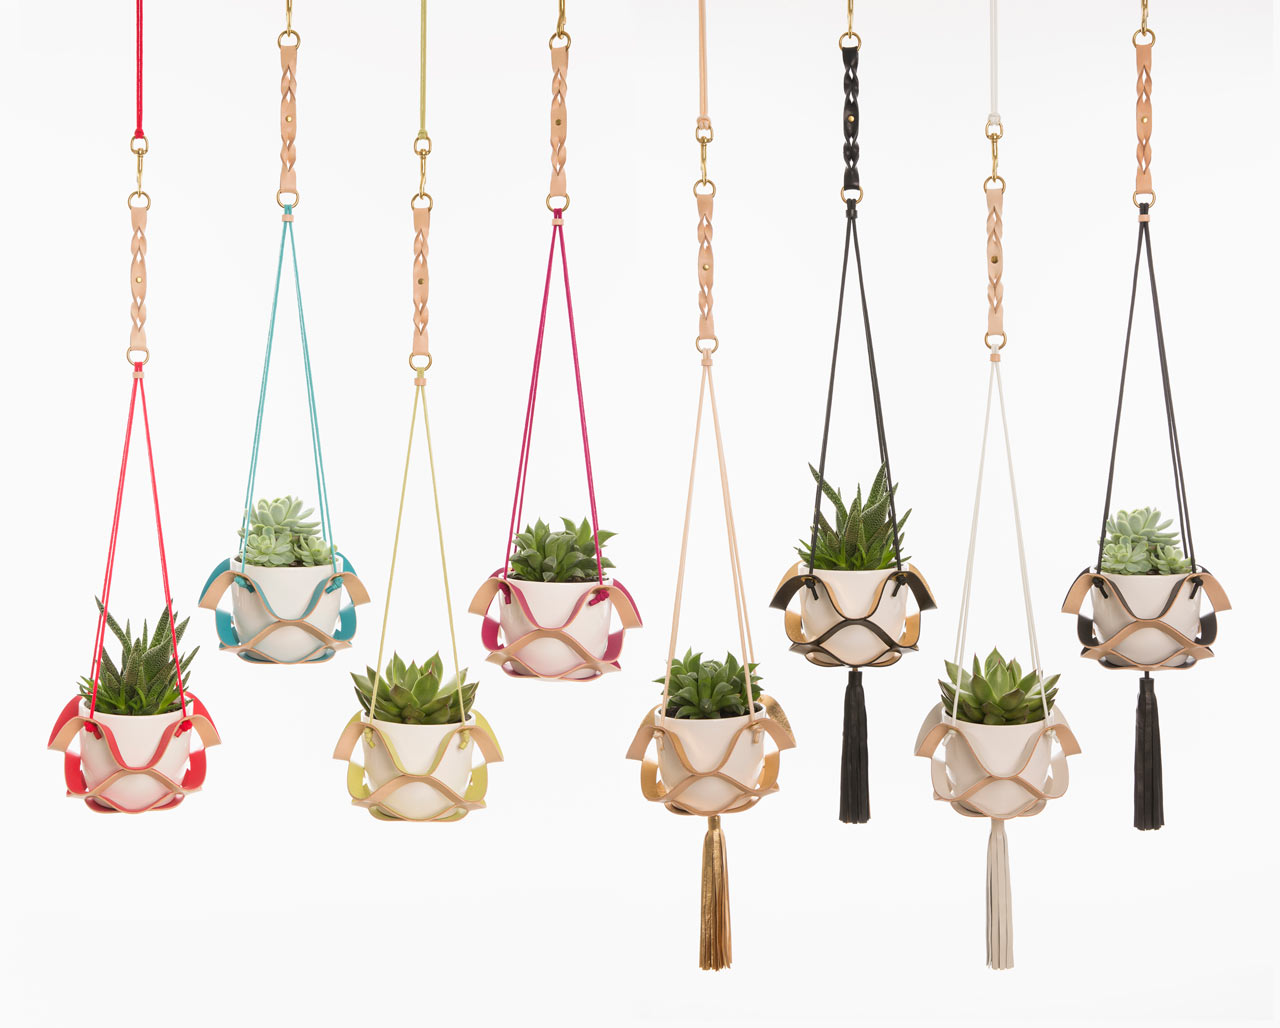 Handcrafted Plant Hangers by Kathryn Leah Payne